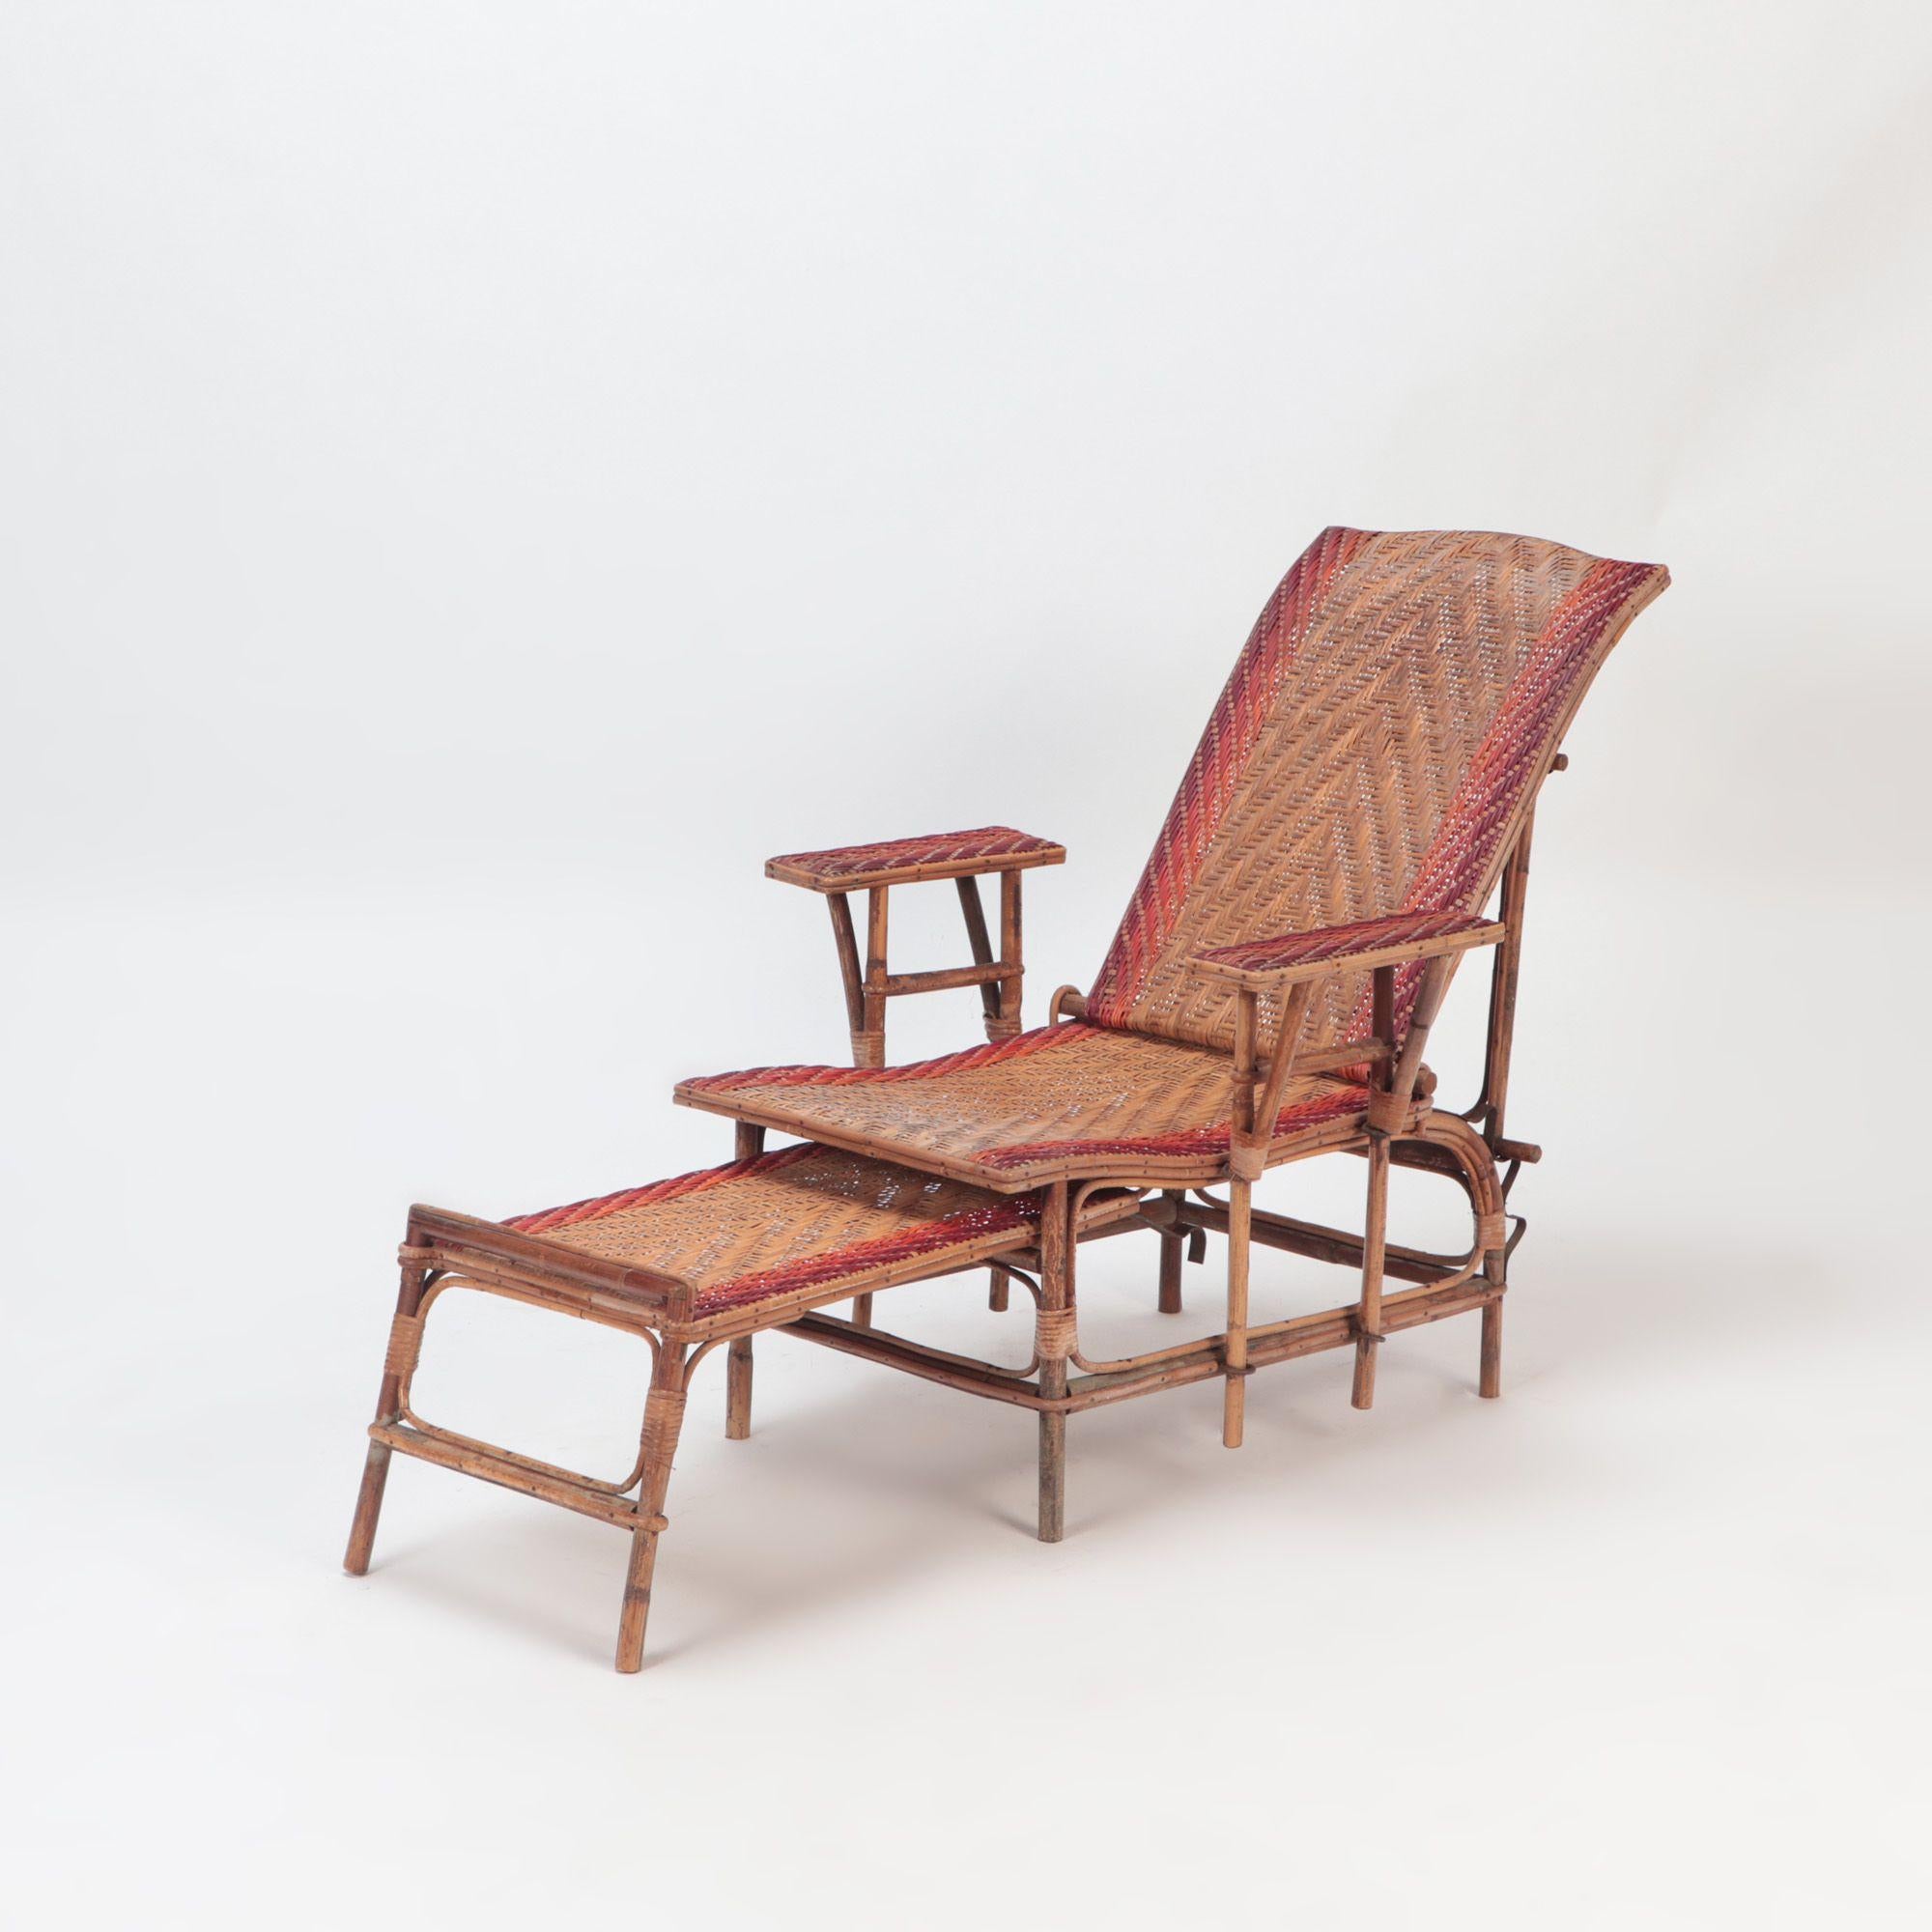 Art Nouveau French Rattan Chaise Longue with Orange and Red Stripes, circa 1900 For Sale